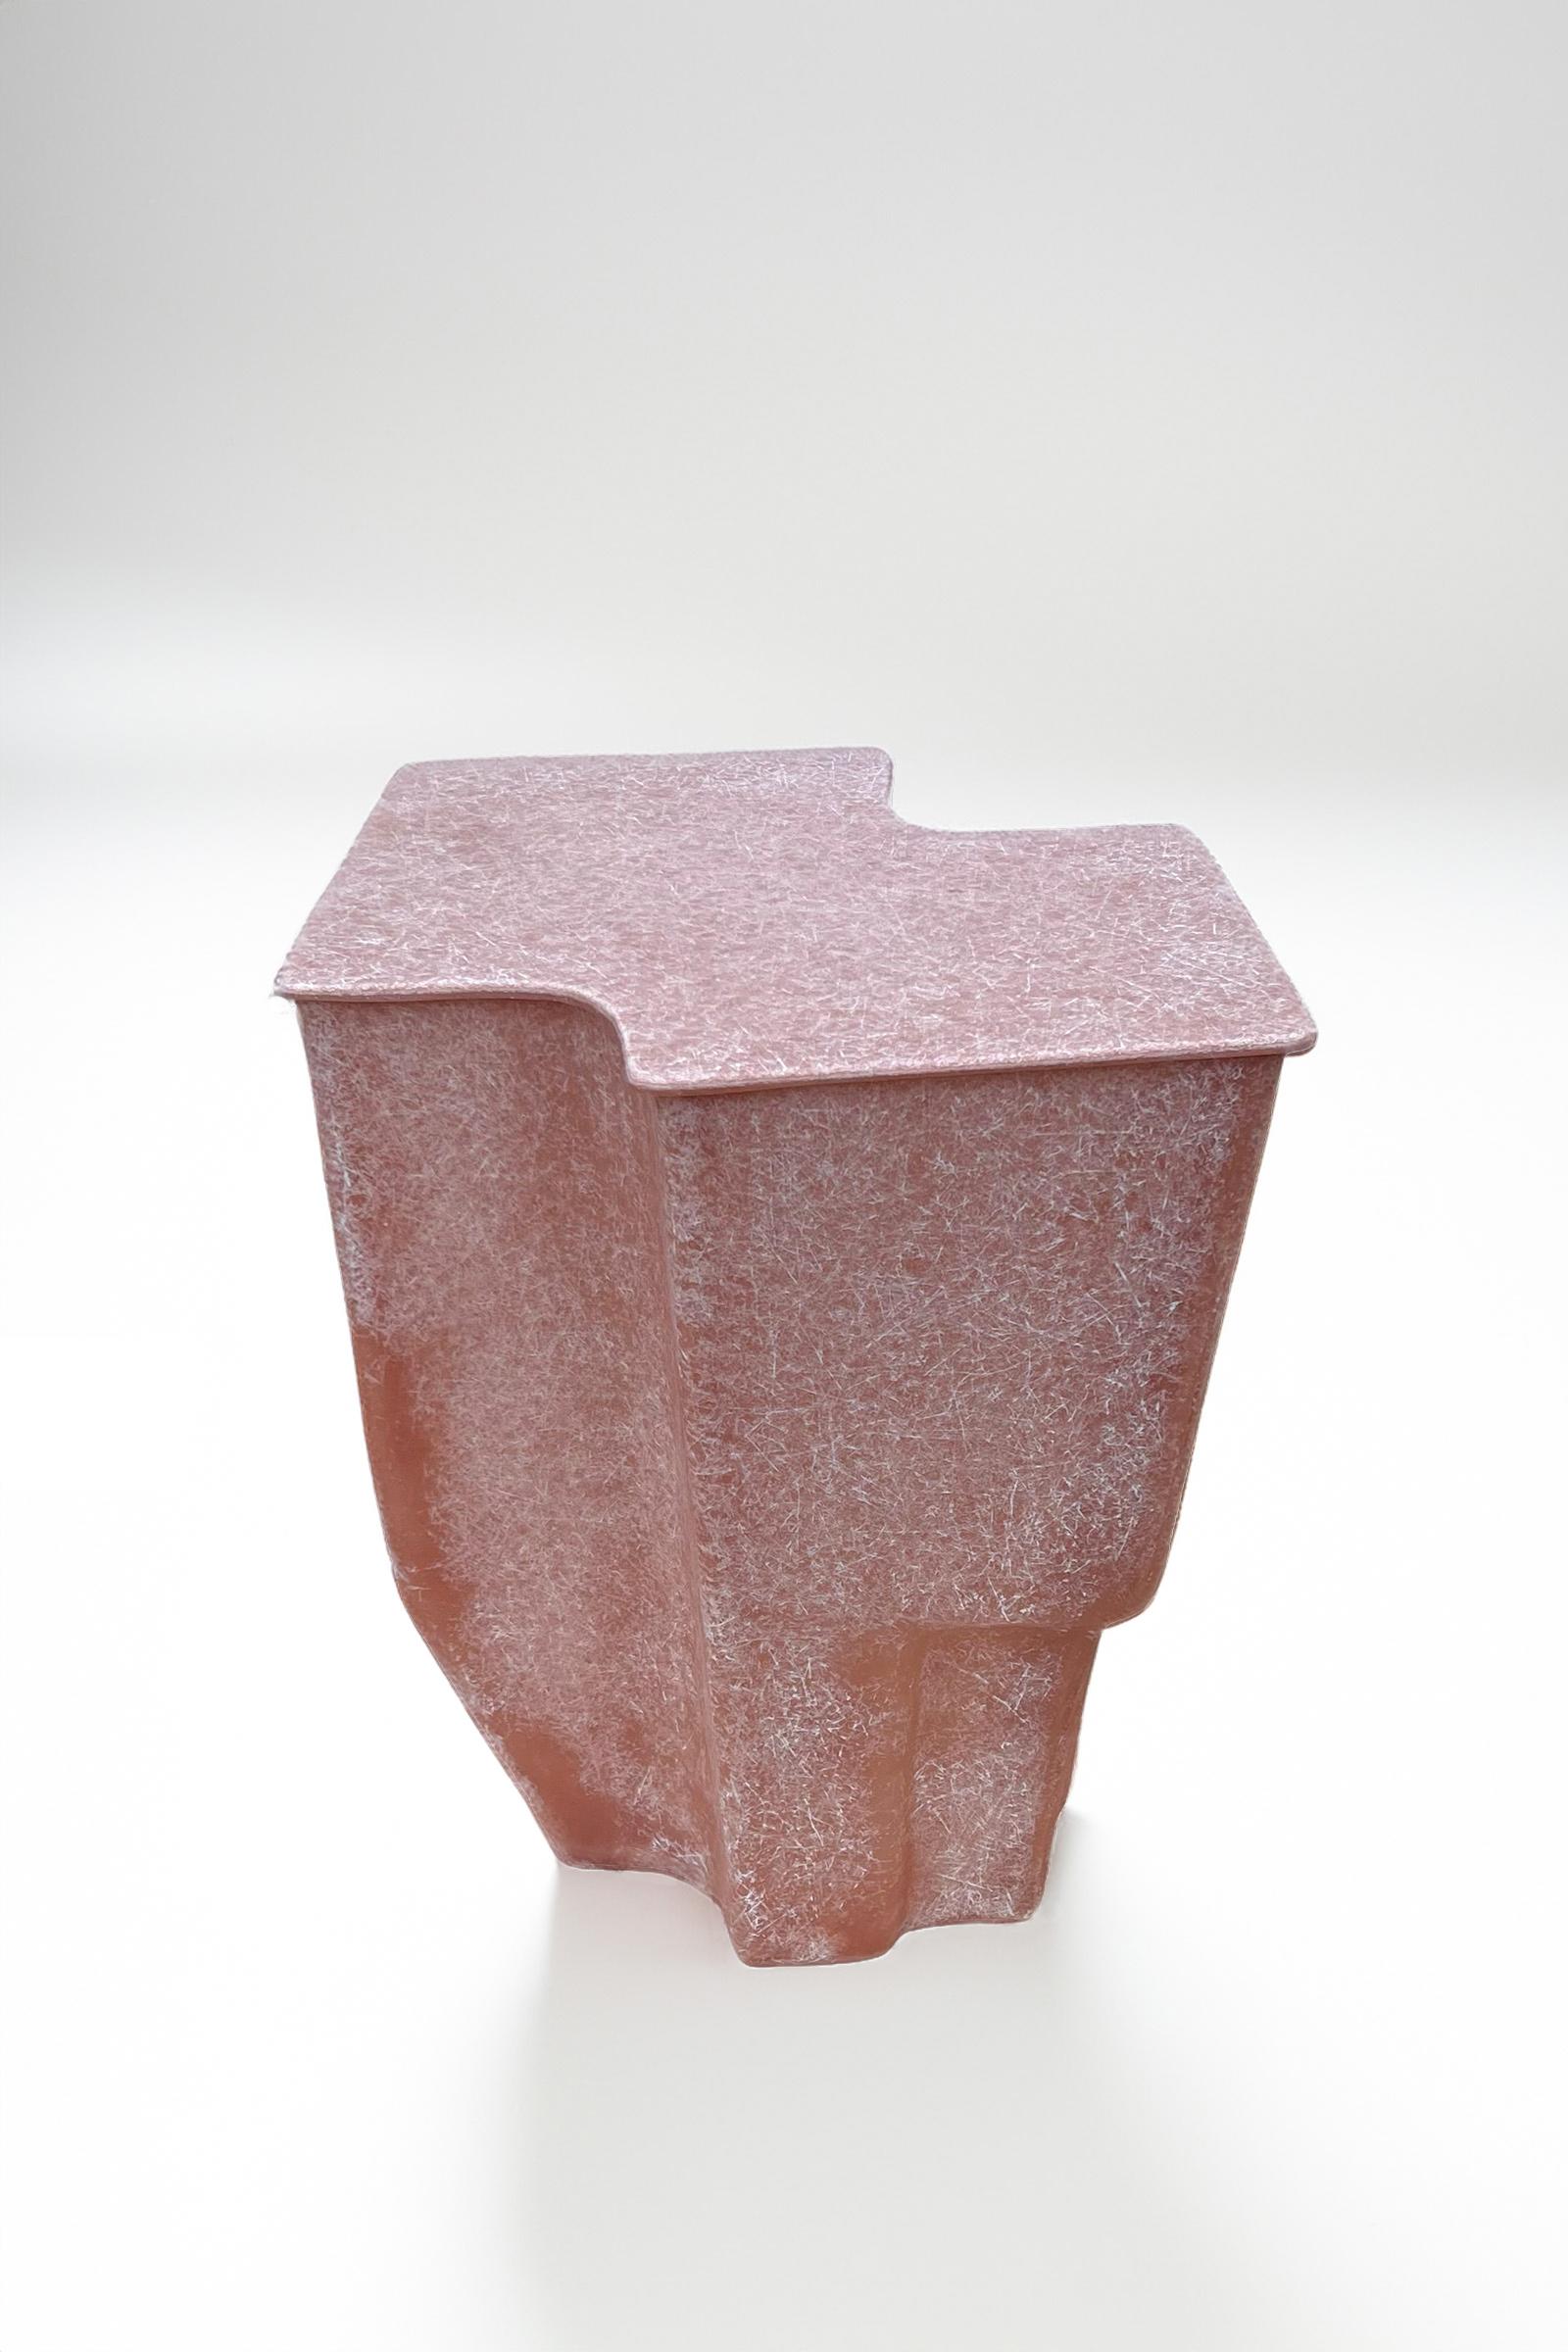 Brutalist Clam Medium by VAVA Objects, handcrafted fiberglass side table made in Sweden For Sale